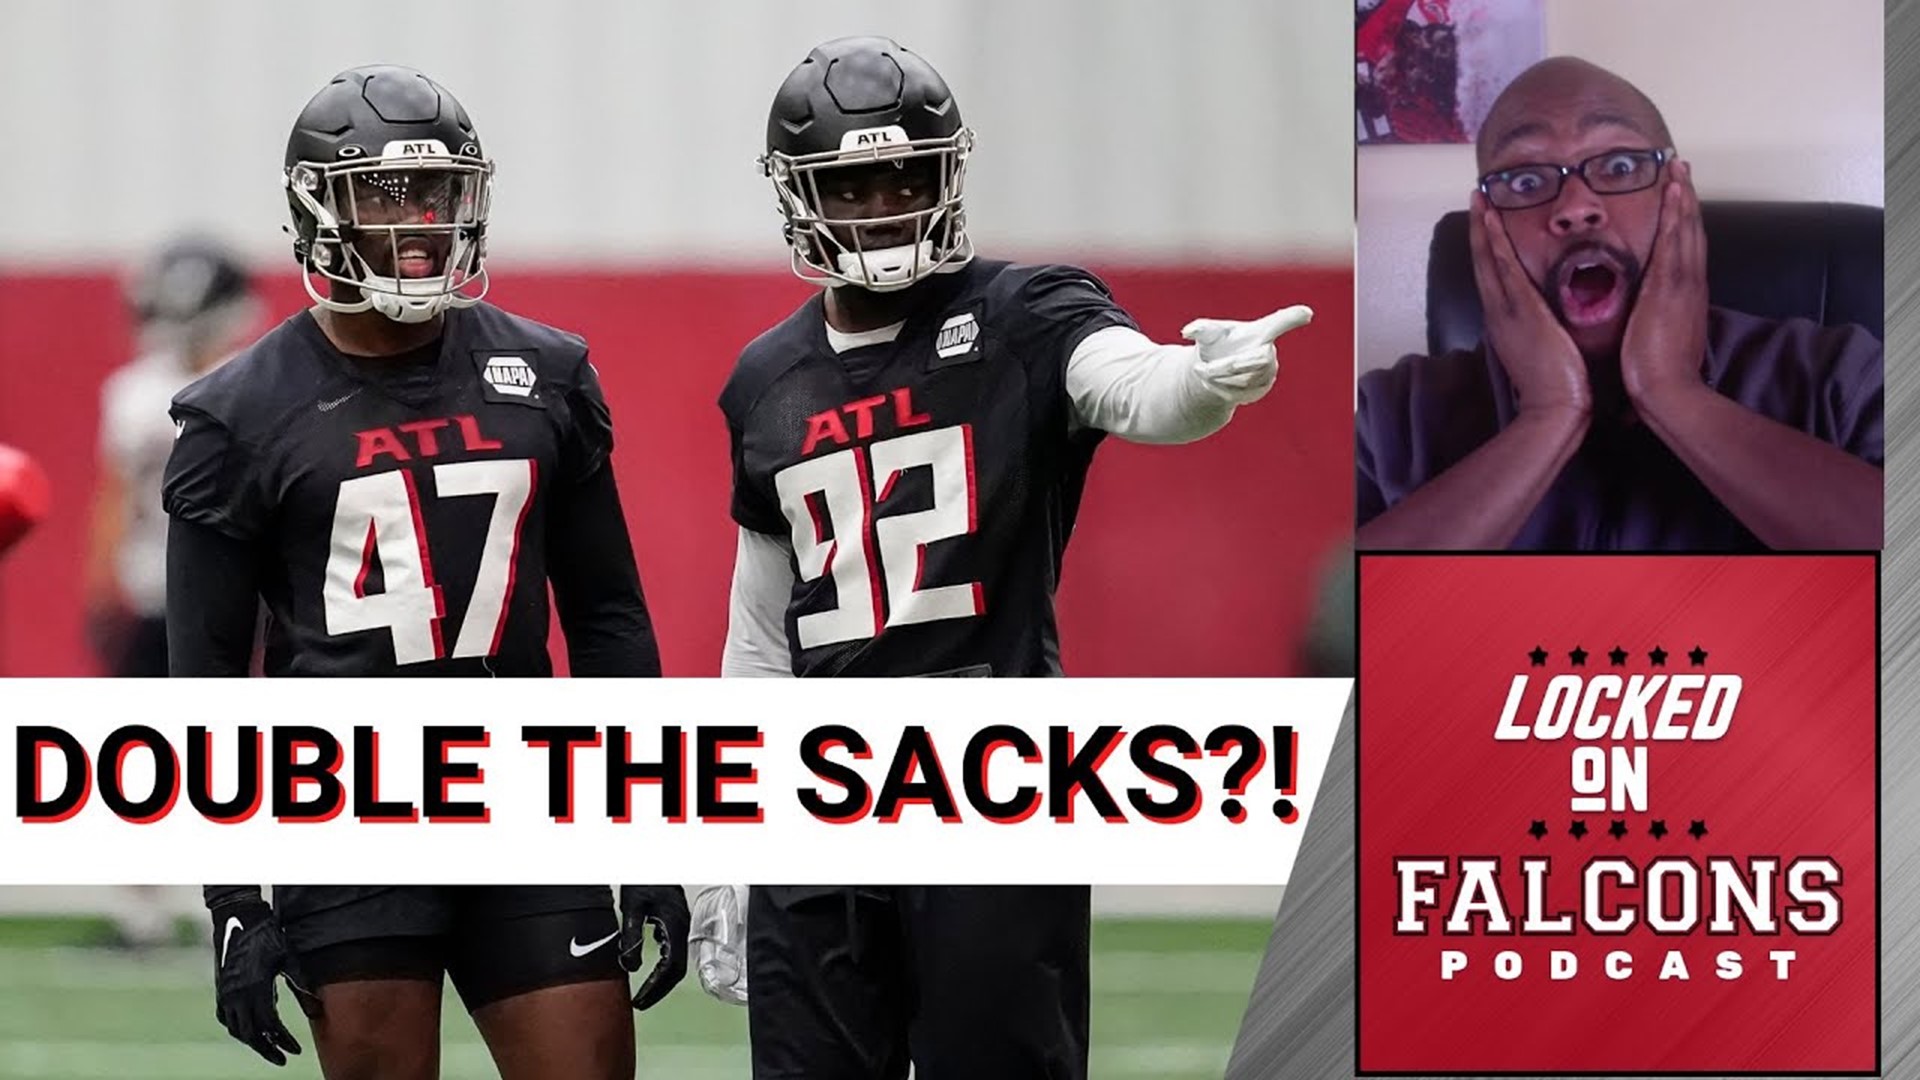 Aaron breaks down the Atlanta Falcons' edge-rushers and how they are poised to improve the team's pass rush in 2022 and for years to come.